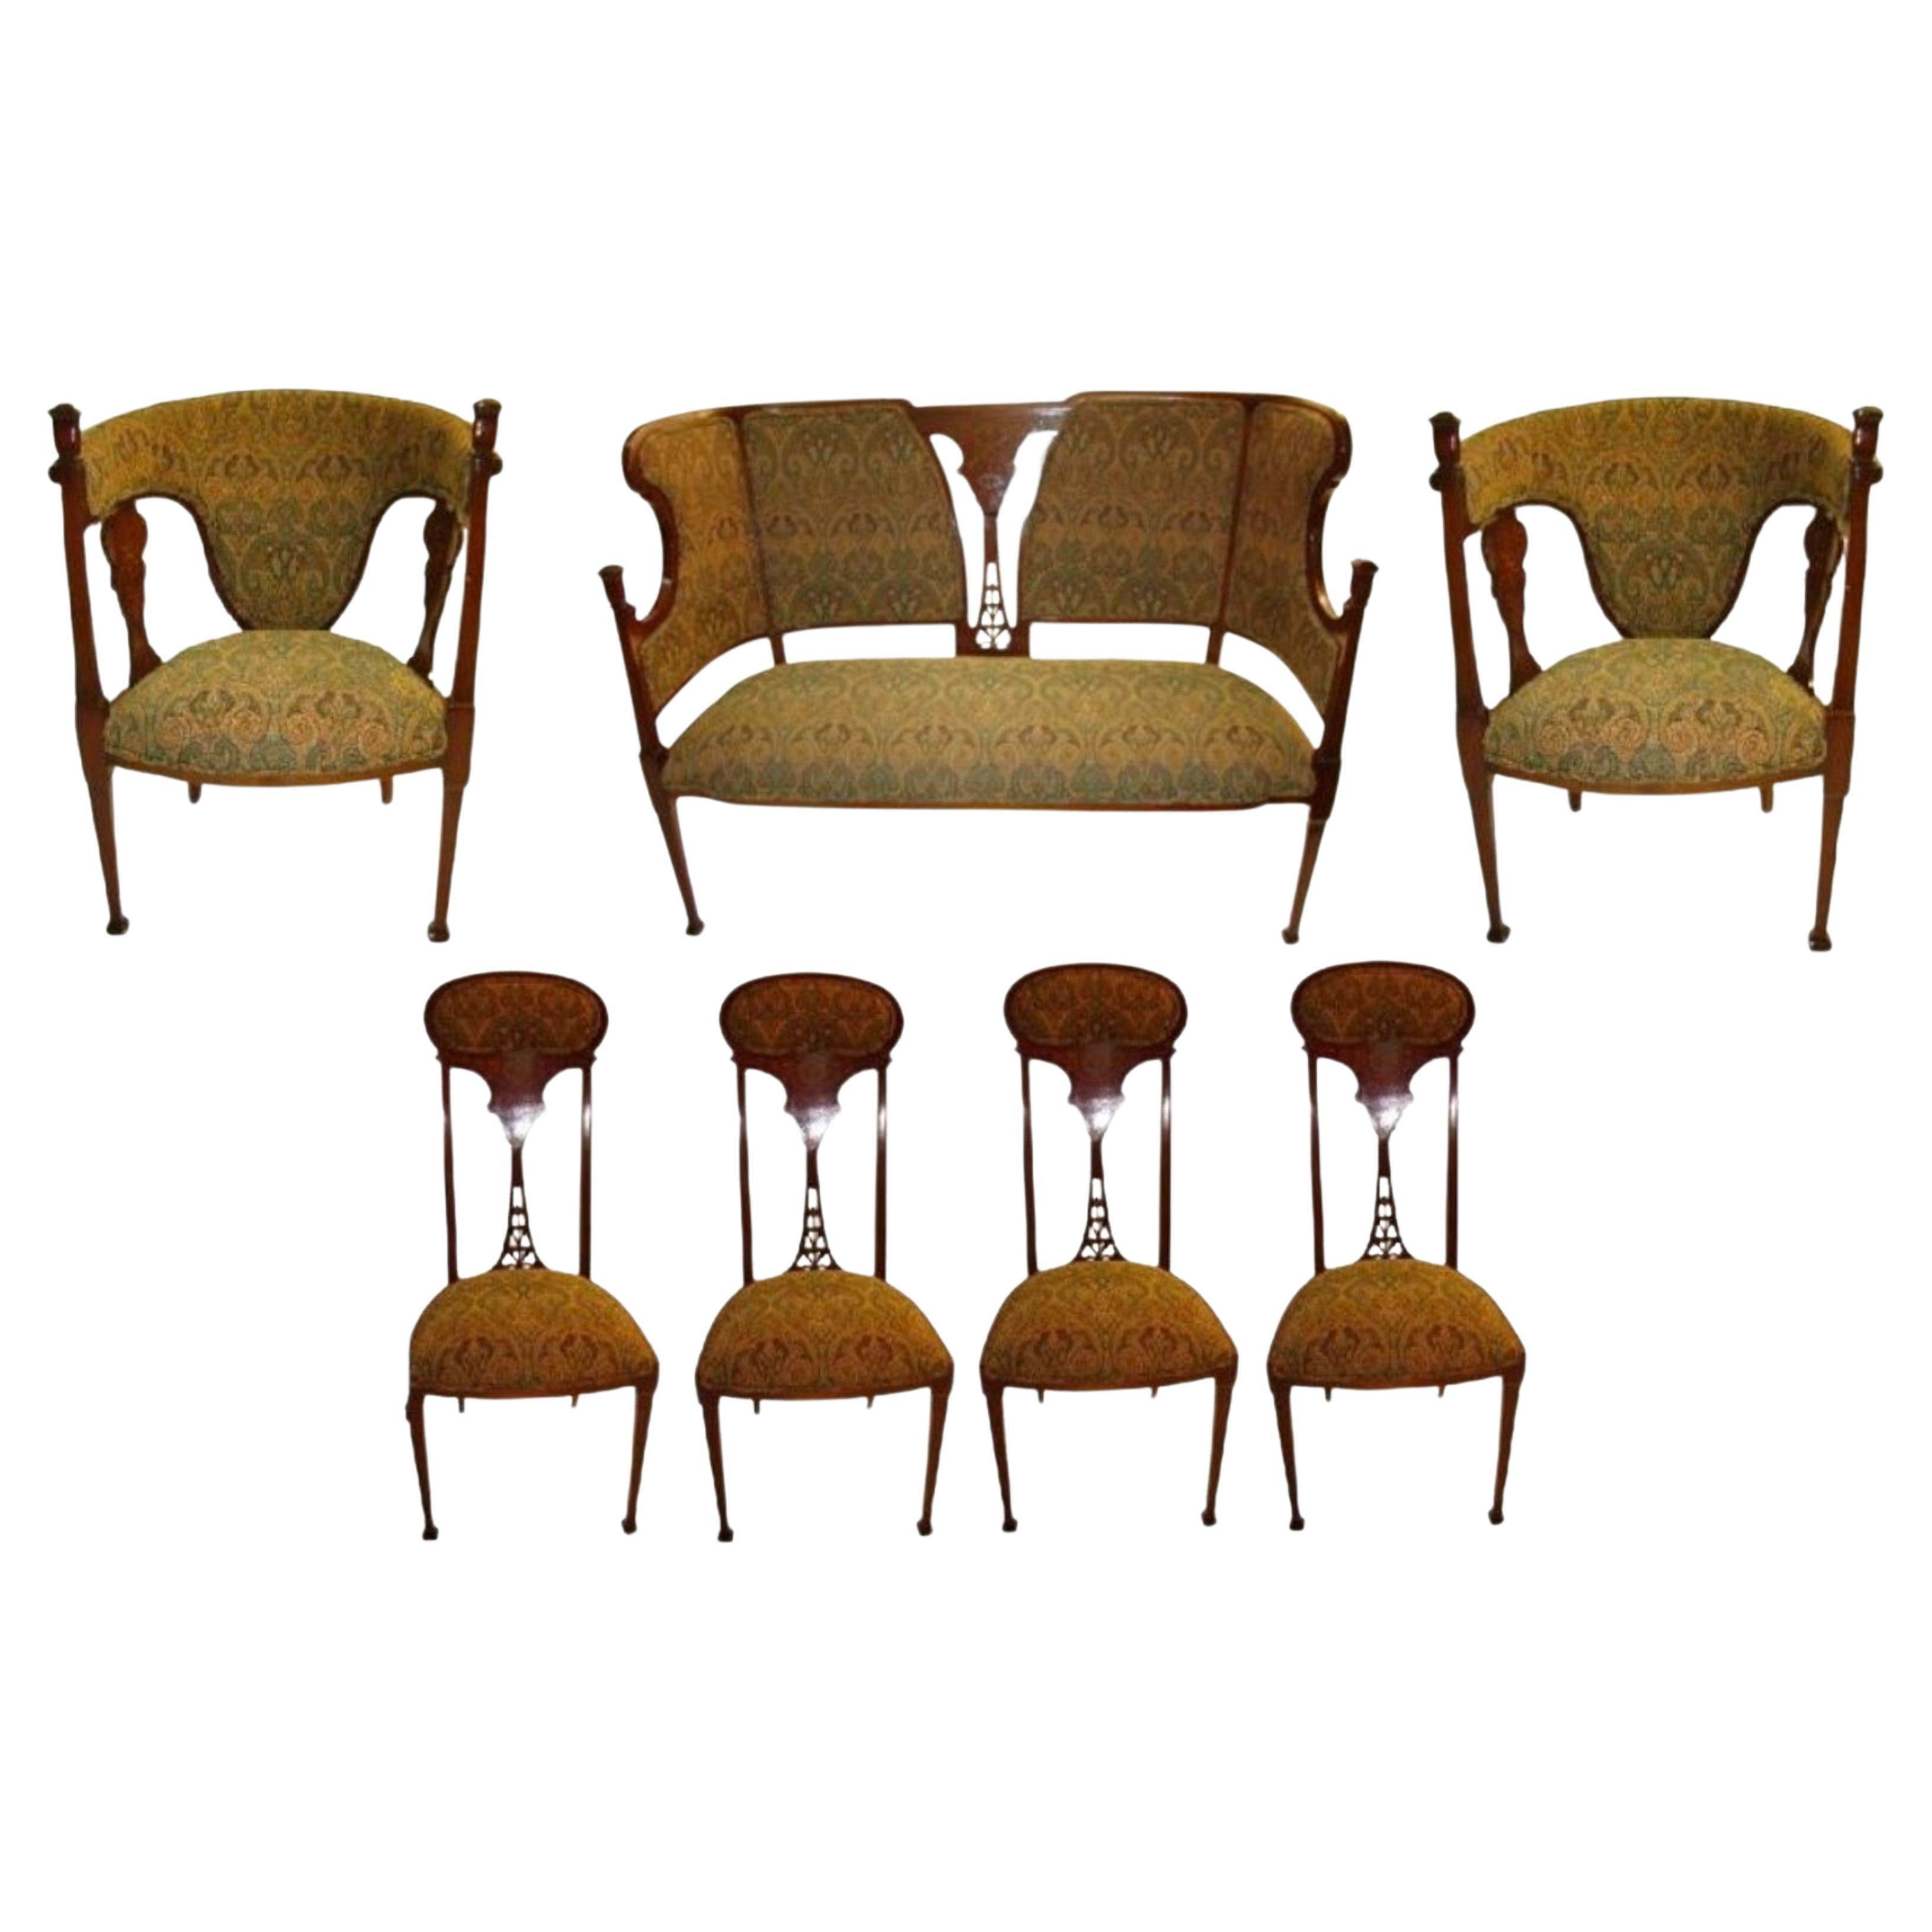 Art Nouveau Set, 1 Sofa, 2 Armchairs, 4 Chairs, 1890, Attributed William Morris